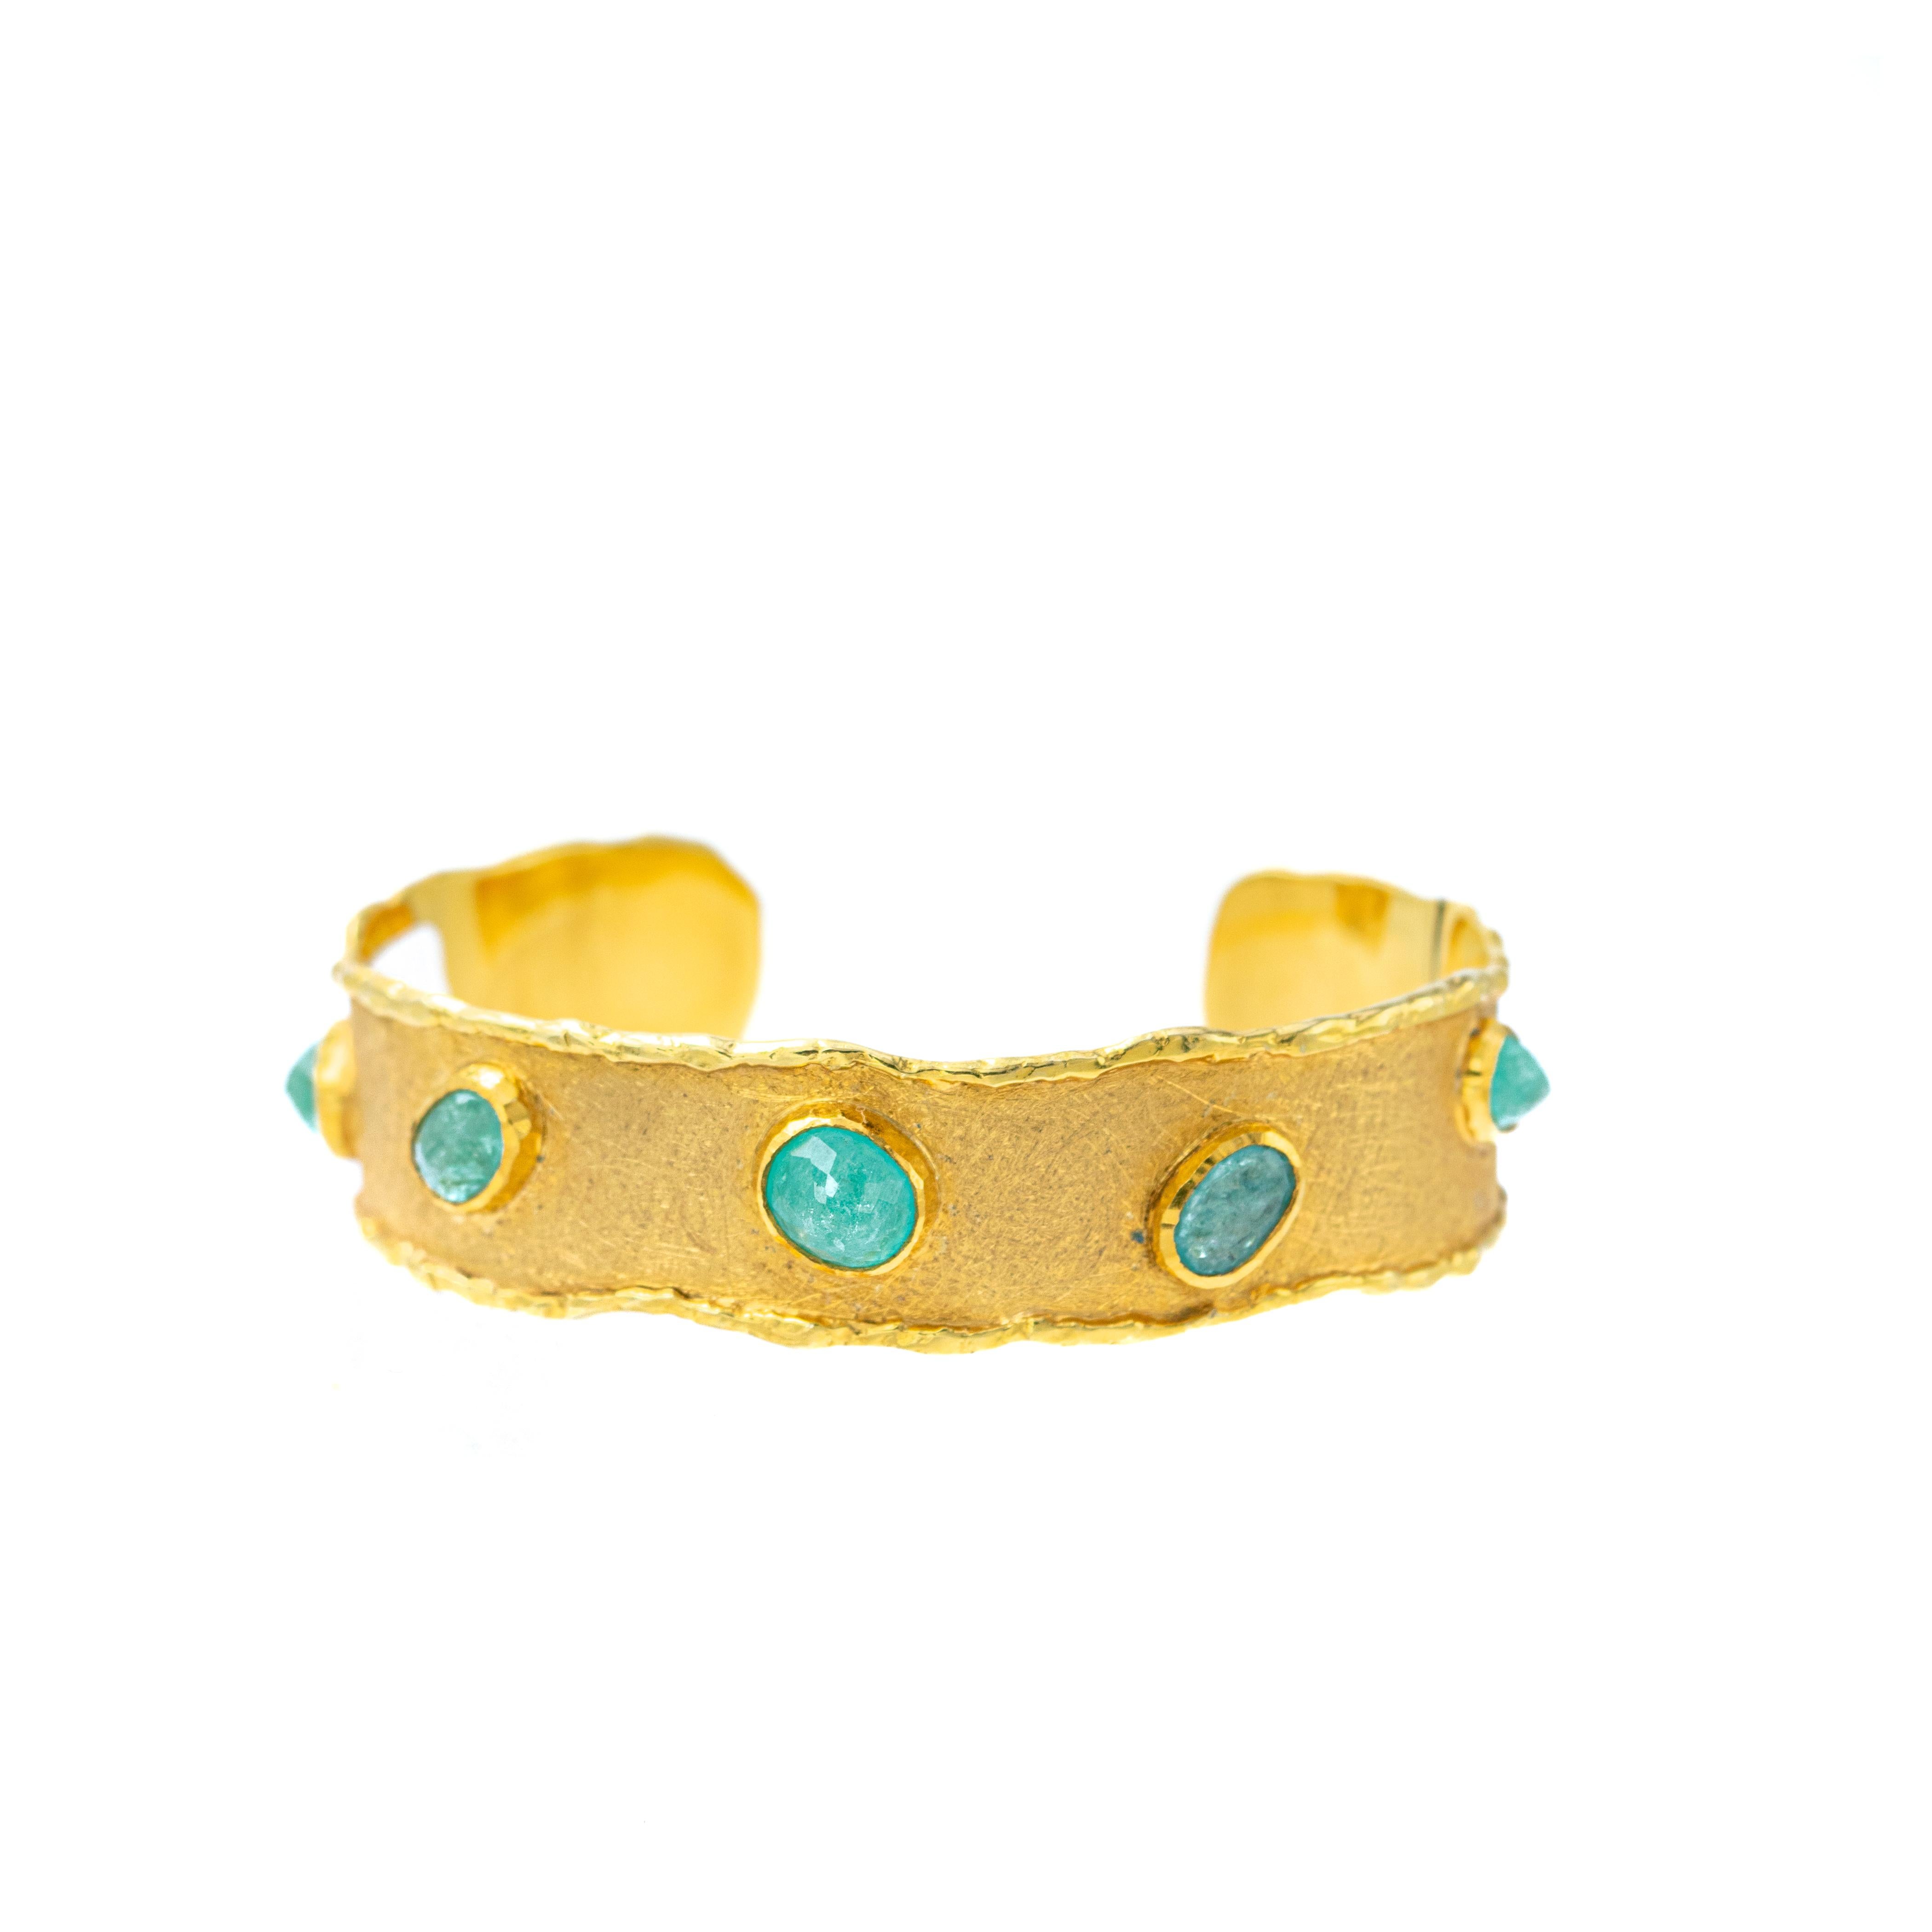 nspired by the energy pulsating throughout nature, Velyan unites pure metals and gemstones into stunning styles that display the grandeur of fine jewelry.

This cuff bracelet features Paribas set in 18k and 24k yellow gold.

Details
Paraiba